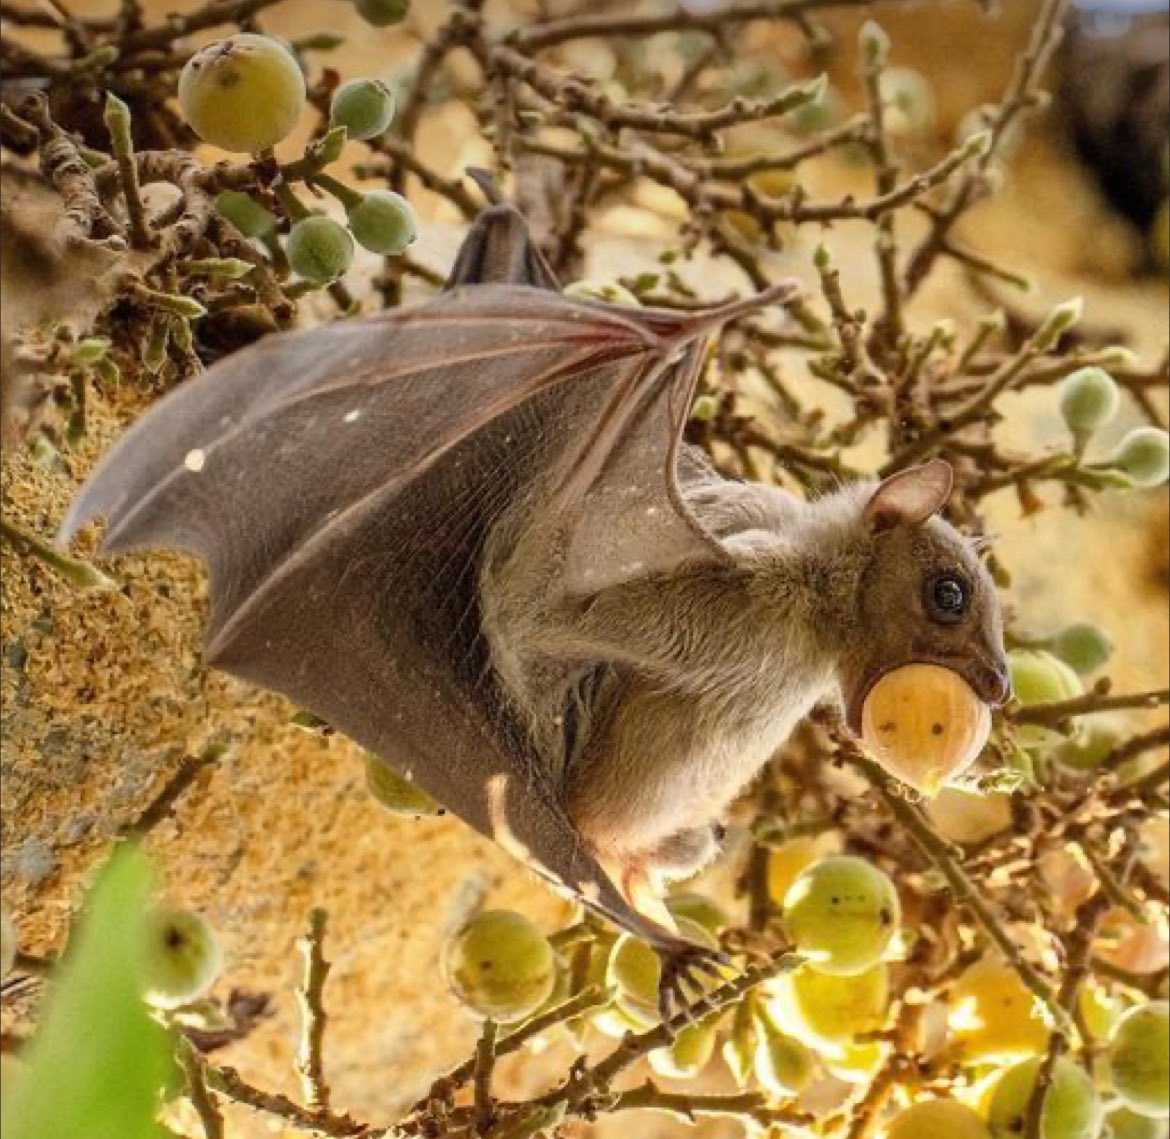 #DYK Bats are often misunderstood and cloaked in myths, they are fascinating beings that play key roles in pollination, insect control, and seed dispersal. Conserve Nature Today 🪴♻️ #ActForNature #WhatHasChanged @WWF @UNBiodiversity @theGEF @PACJA1 @FMEnvng @CSDevNet1